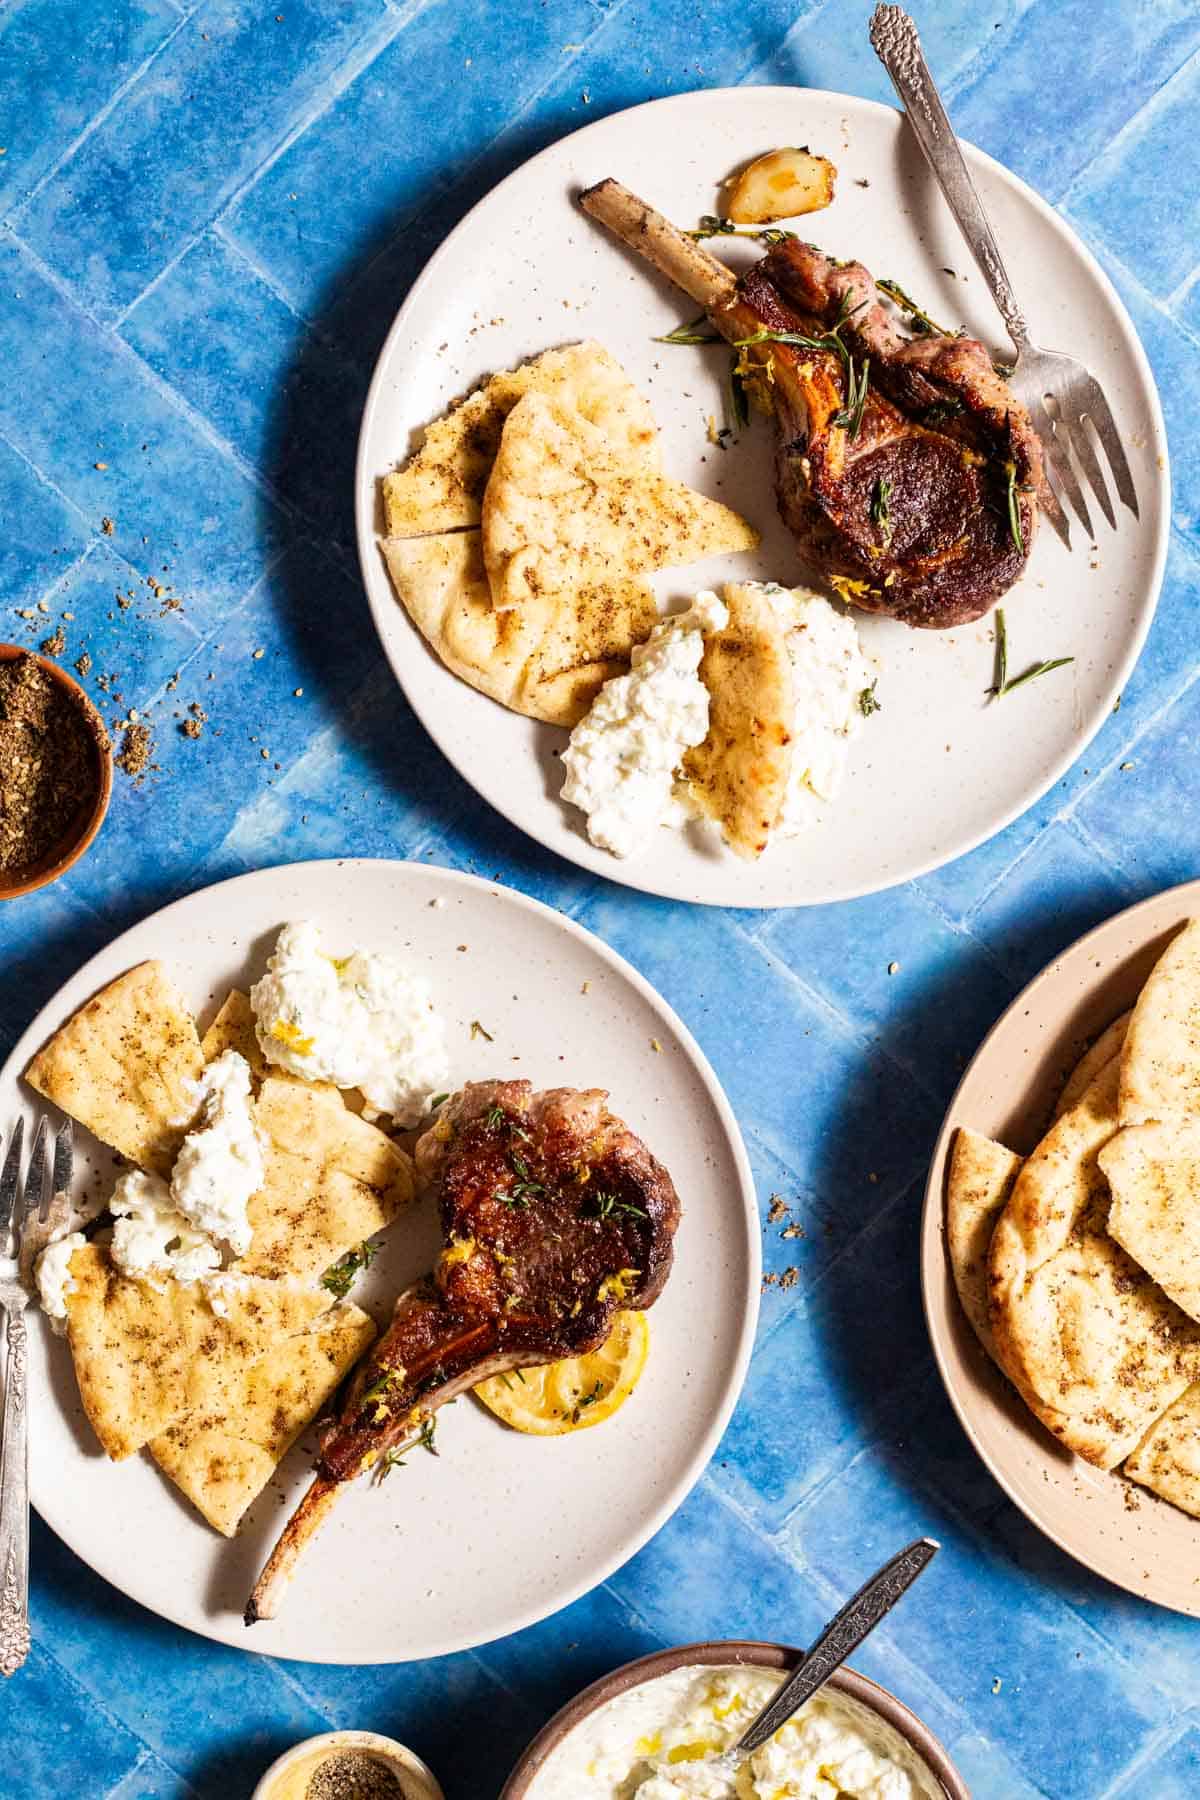 An overhead photo of two plates, each with a pan seared lamb chop, some seasoned flatbread, yogurt sauce and a fork. Next to this is a plate with more of the flatbread and bowls of za'atar and yogurt sauce.